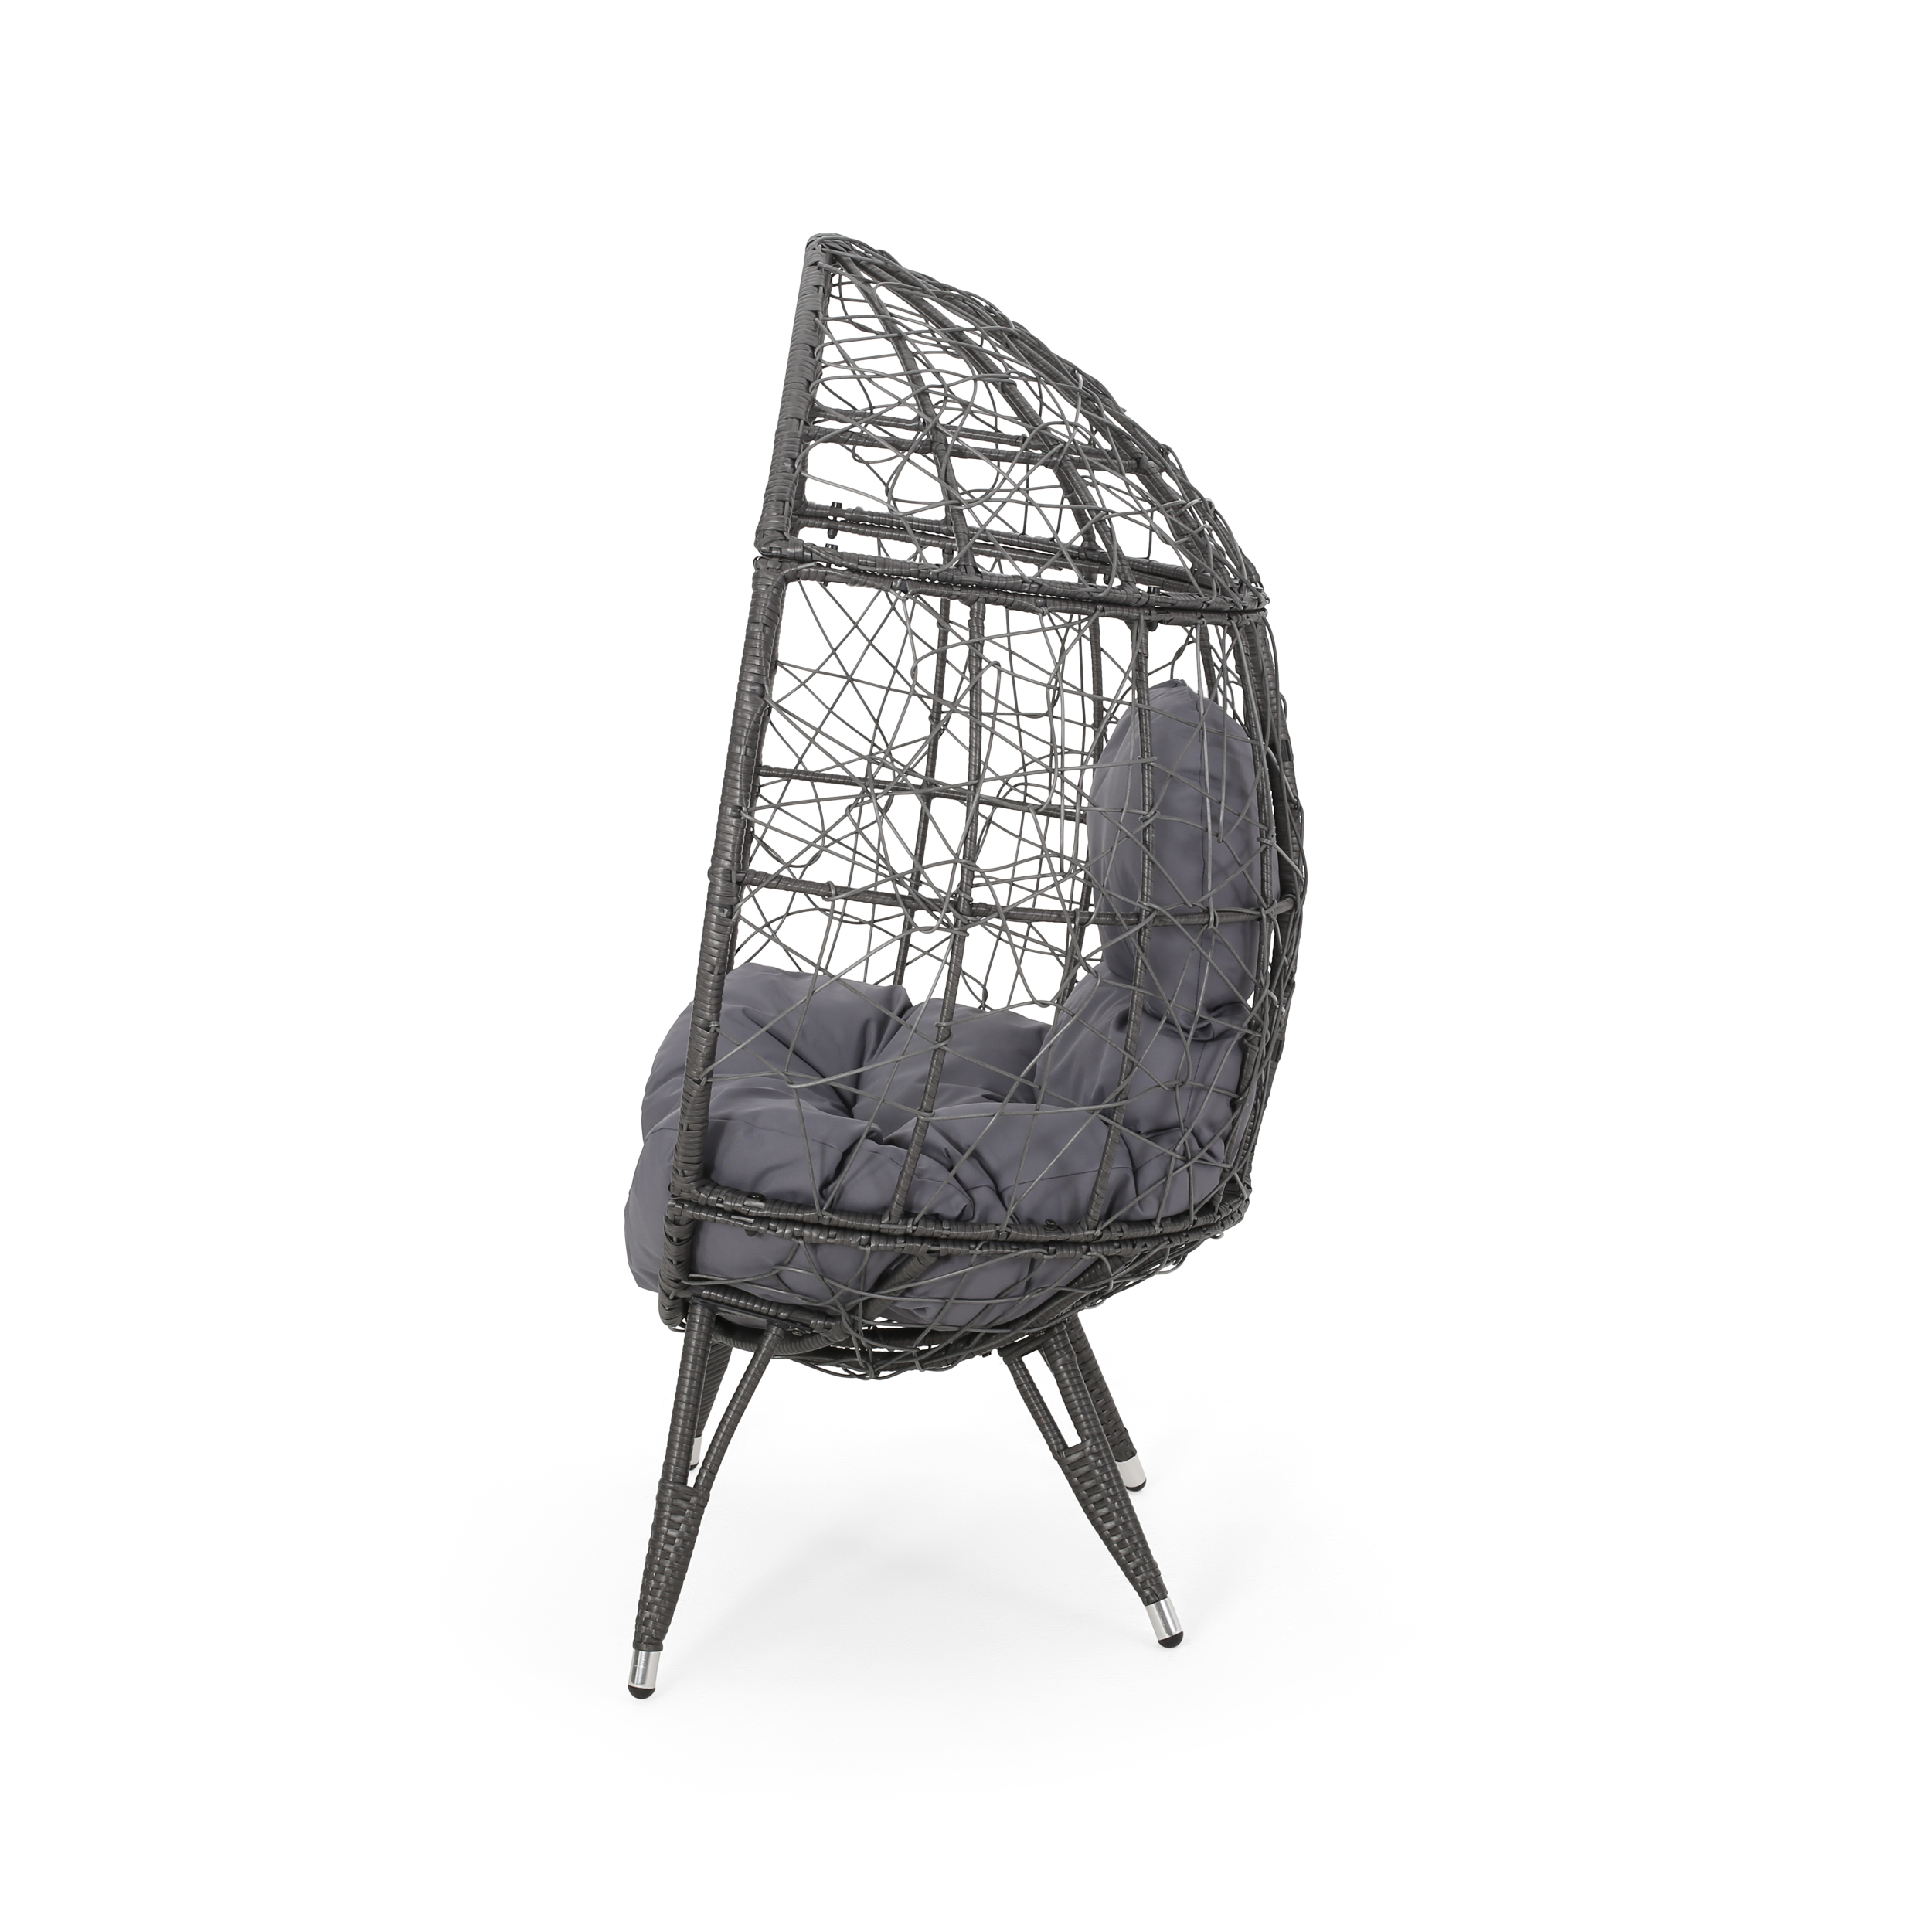 Keondre Indoor Wicker Teardrop Chair with Cushion, Gray and Dark Gray - image 2 of 11